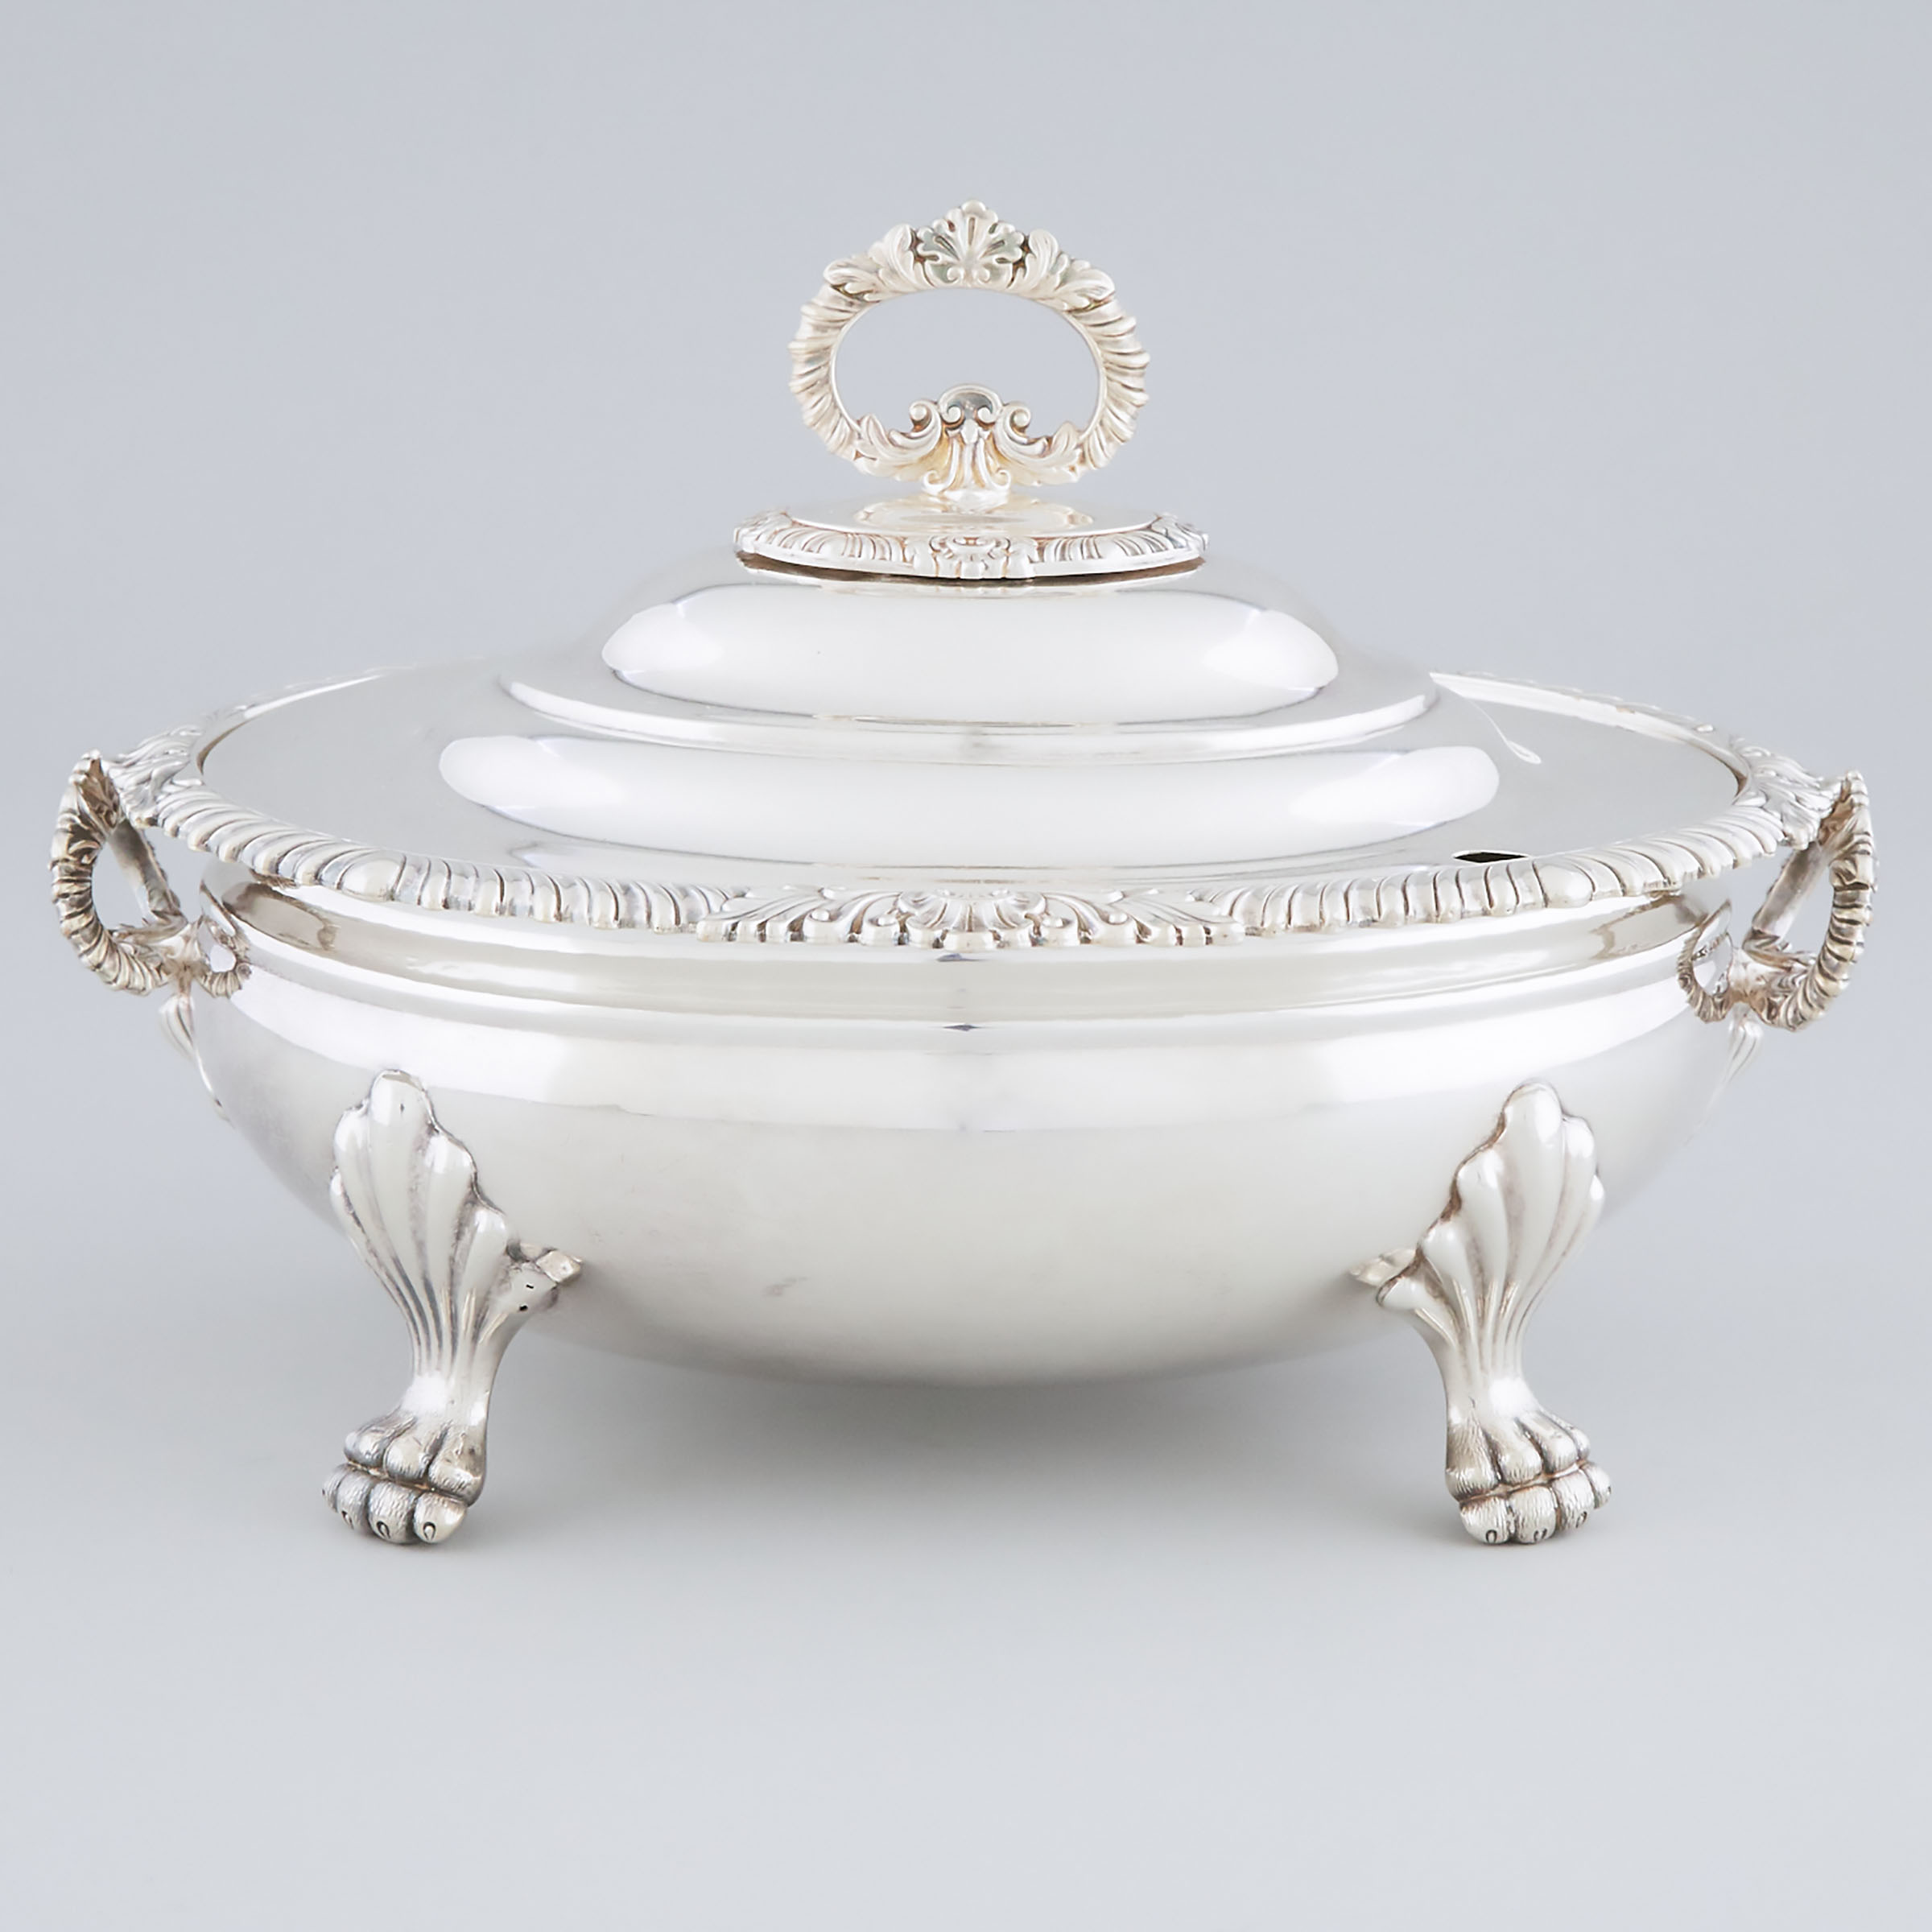 English Silver Plated Oval Covered Soup Tureen, late 19th/early 20th century